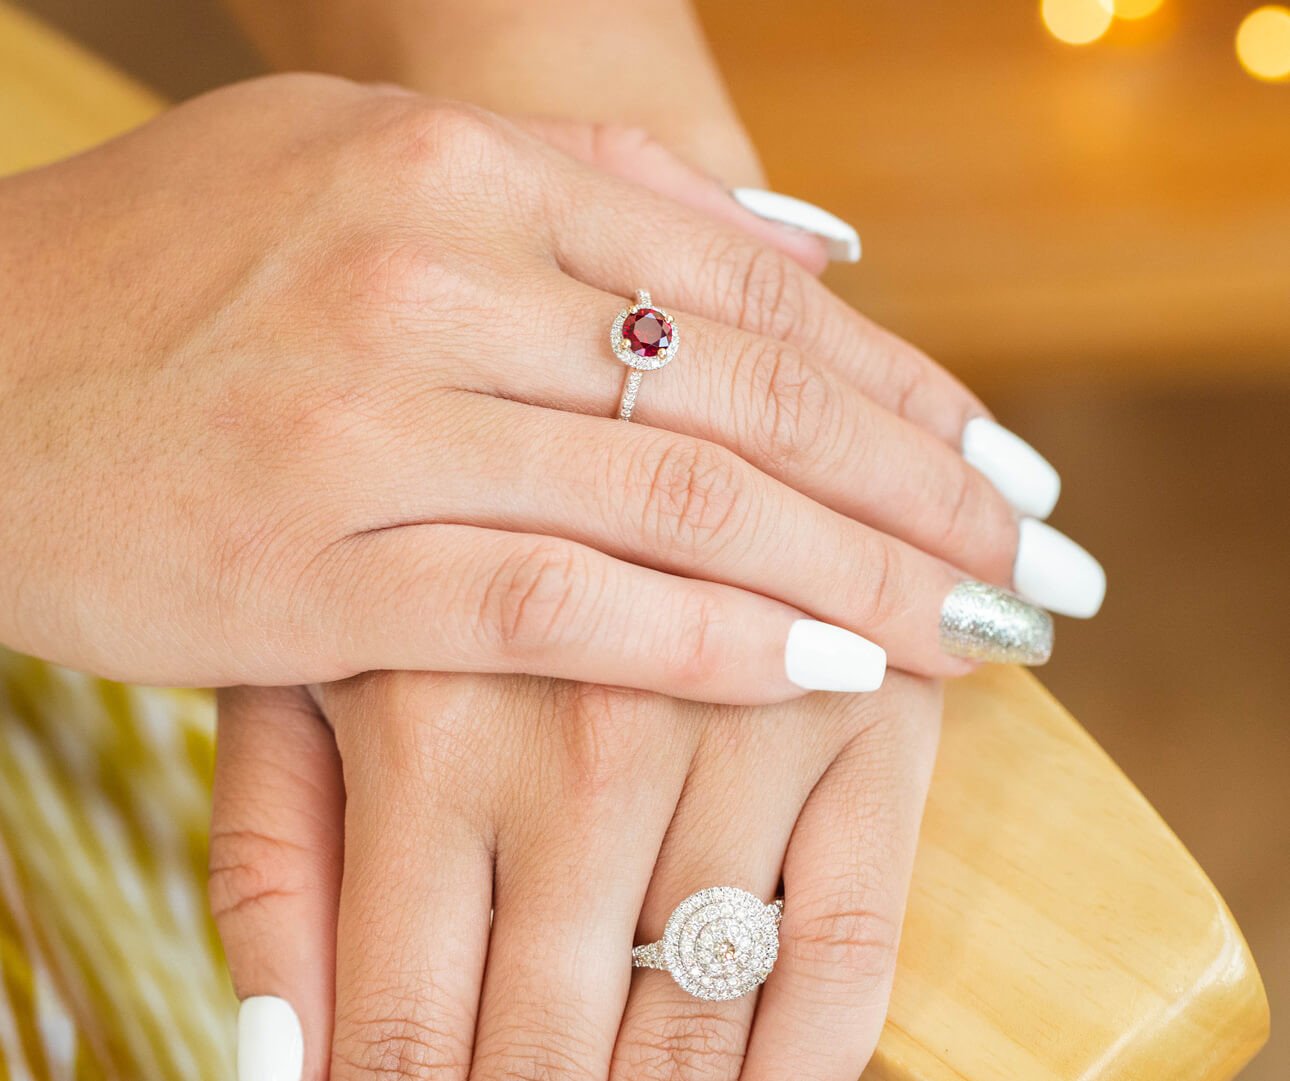 Why is there a specific wedding ring finger?